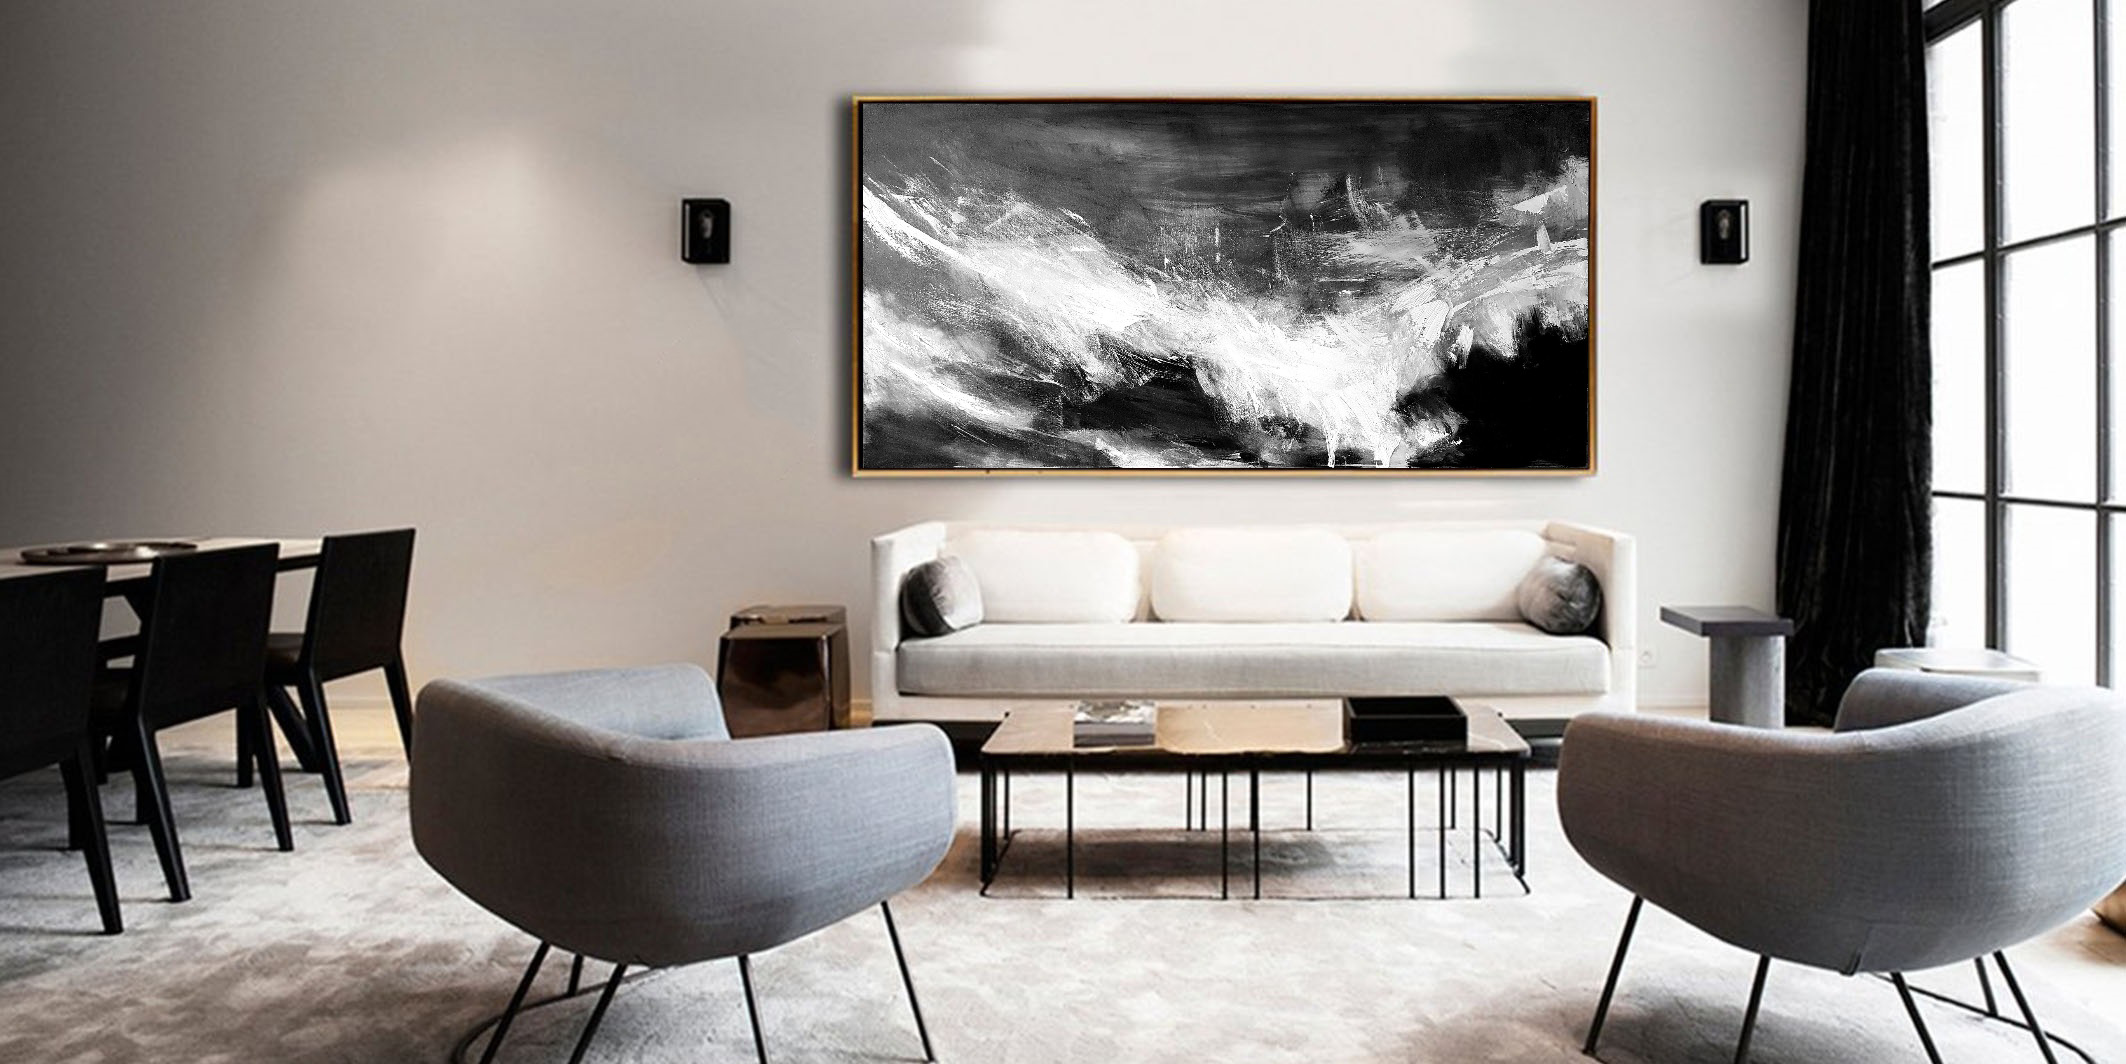 Why Should One Use Large Wall Art?